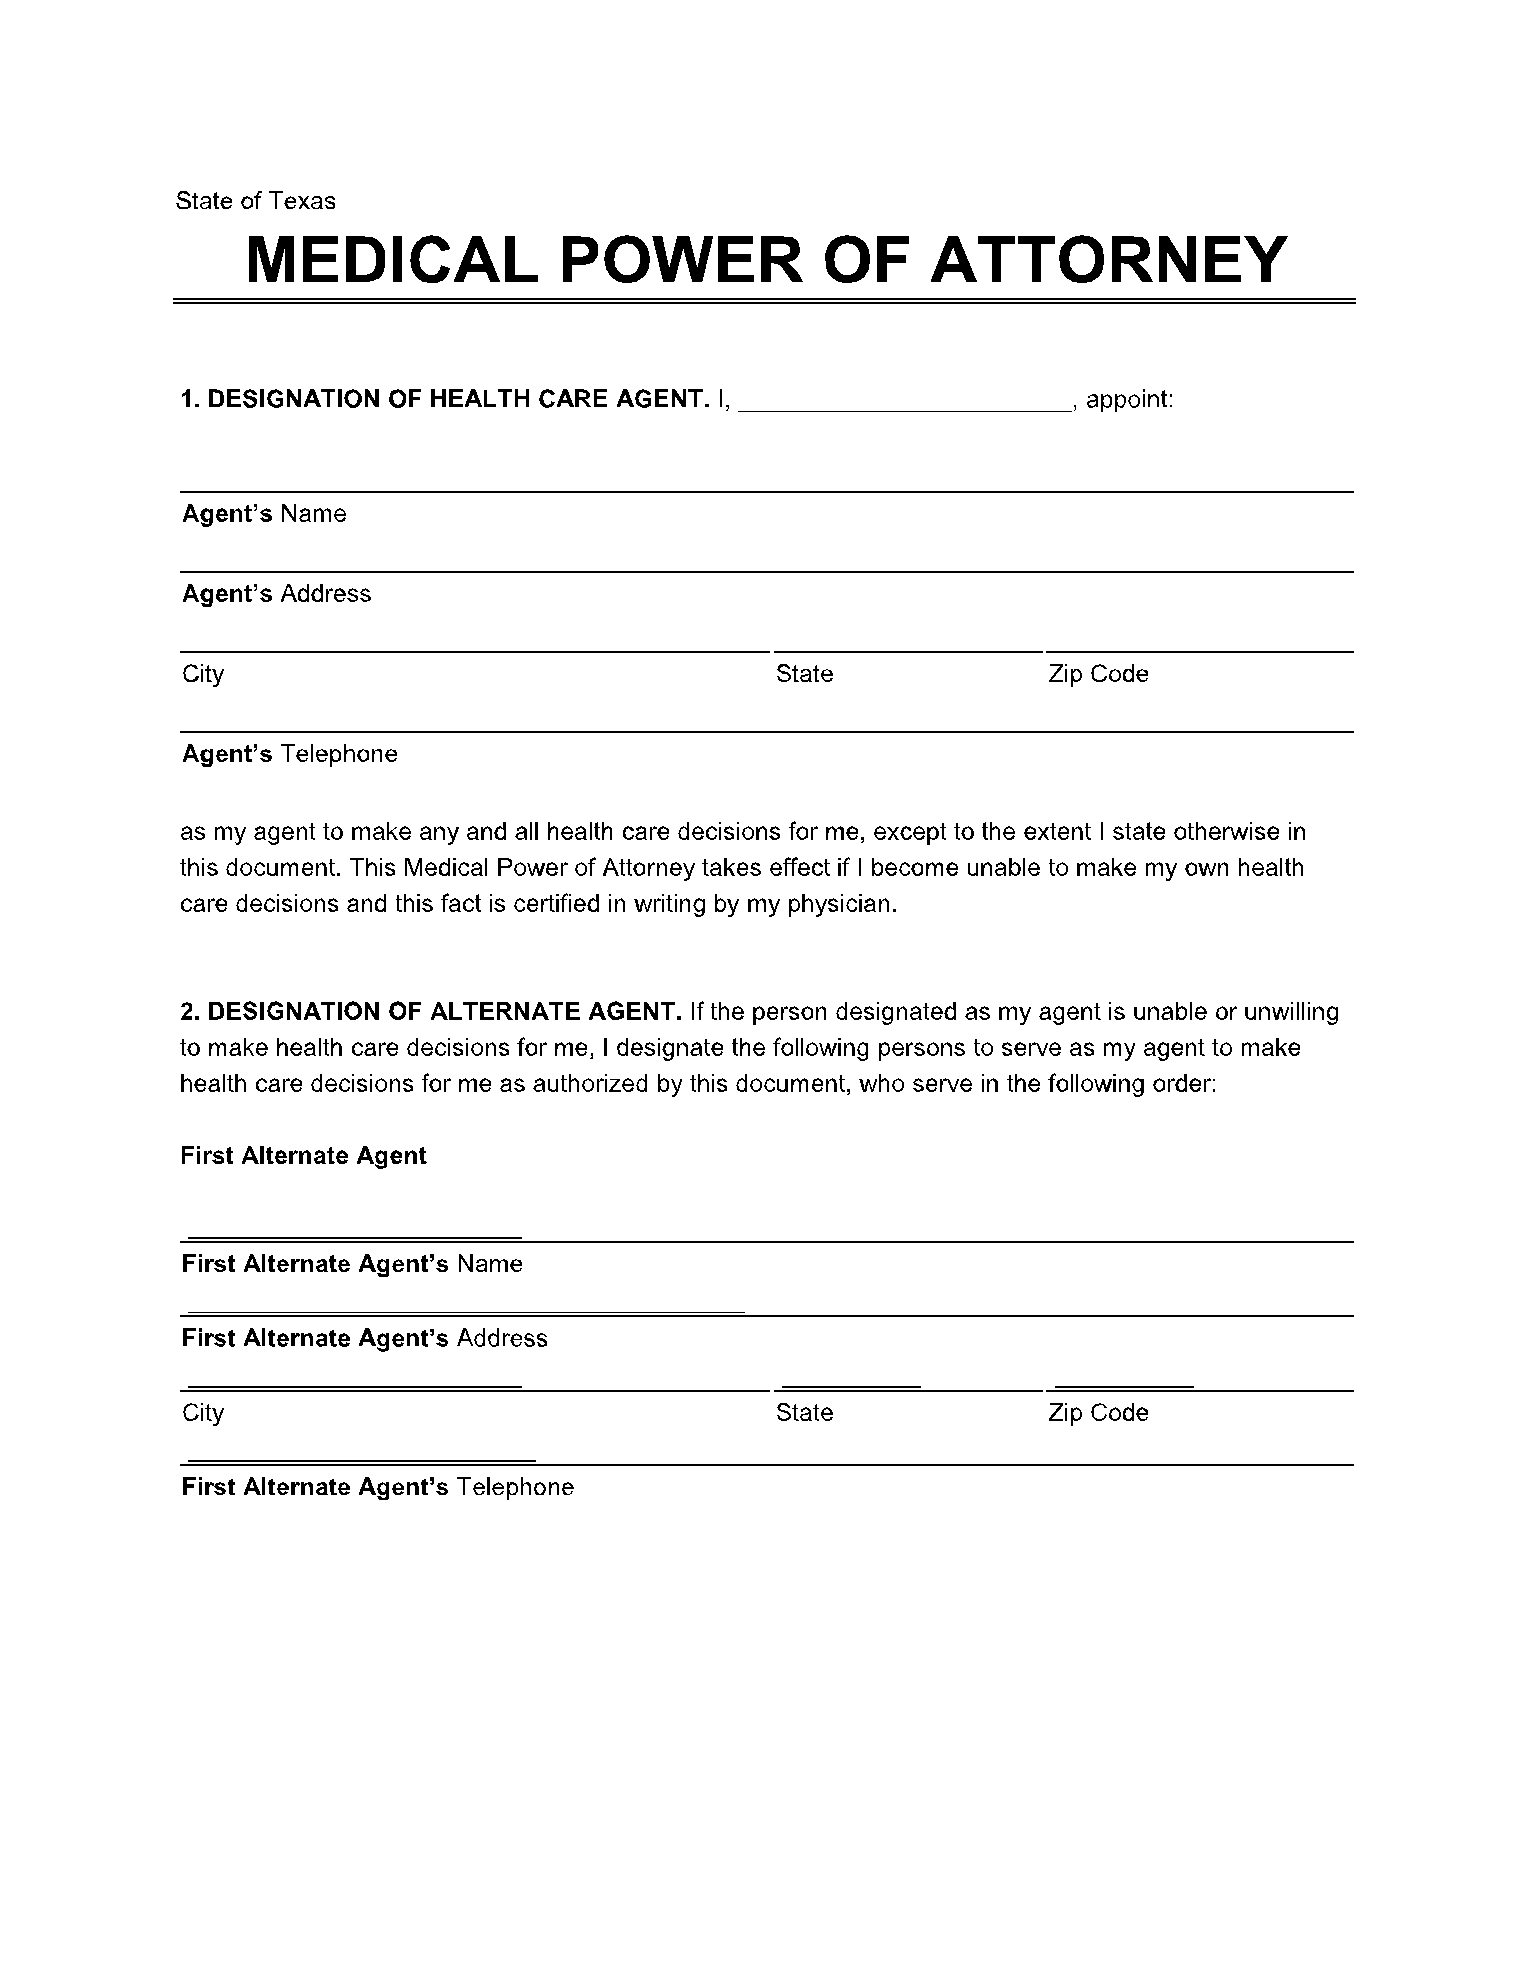 Medical Power of Attorney in Texas